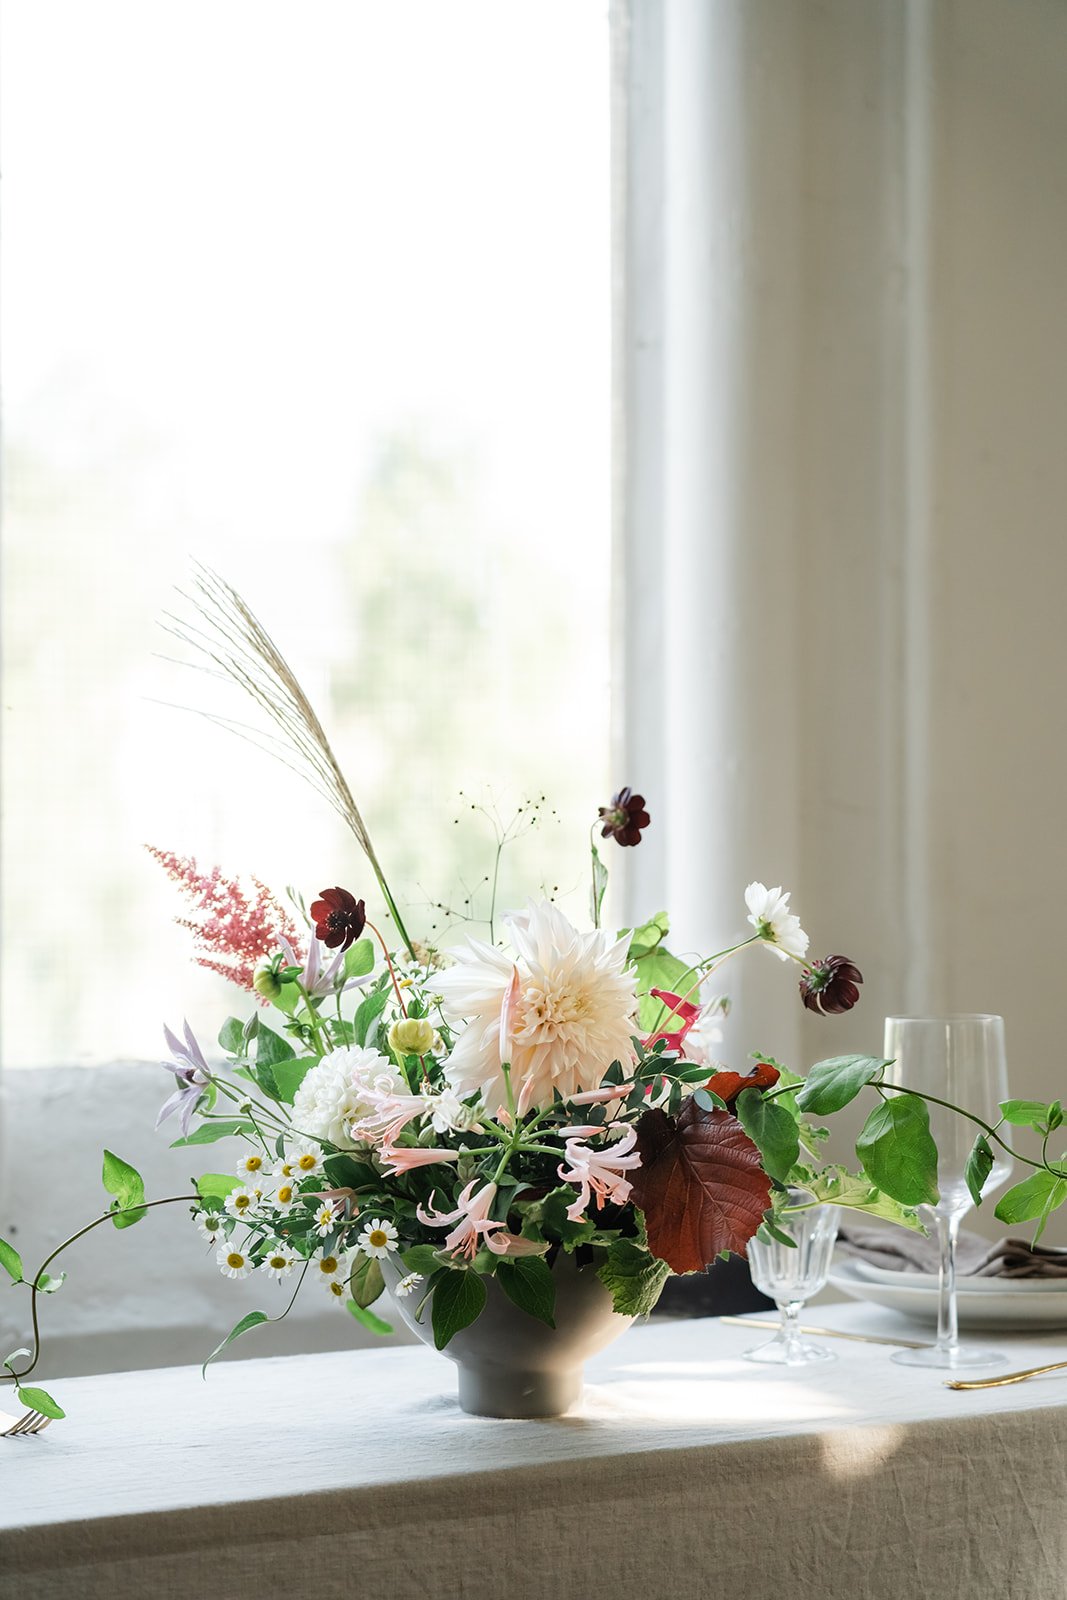 Table setting from the flowery compote bowl workshop